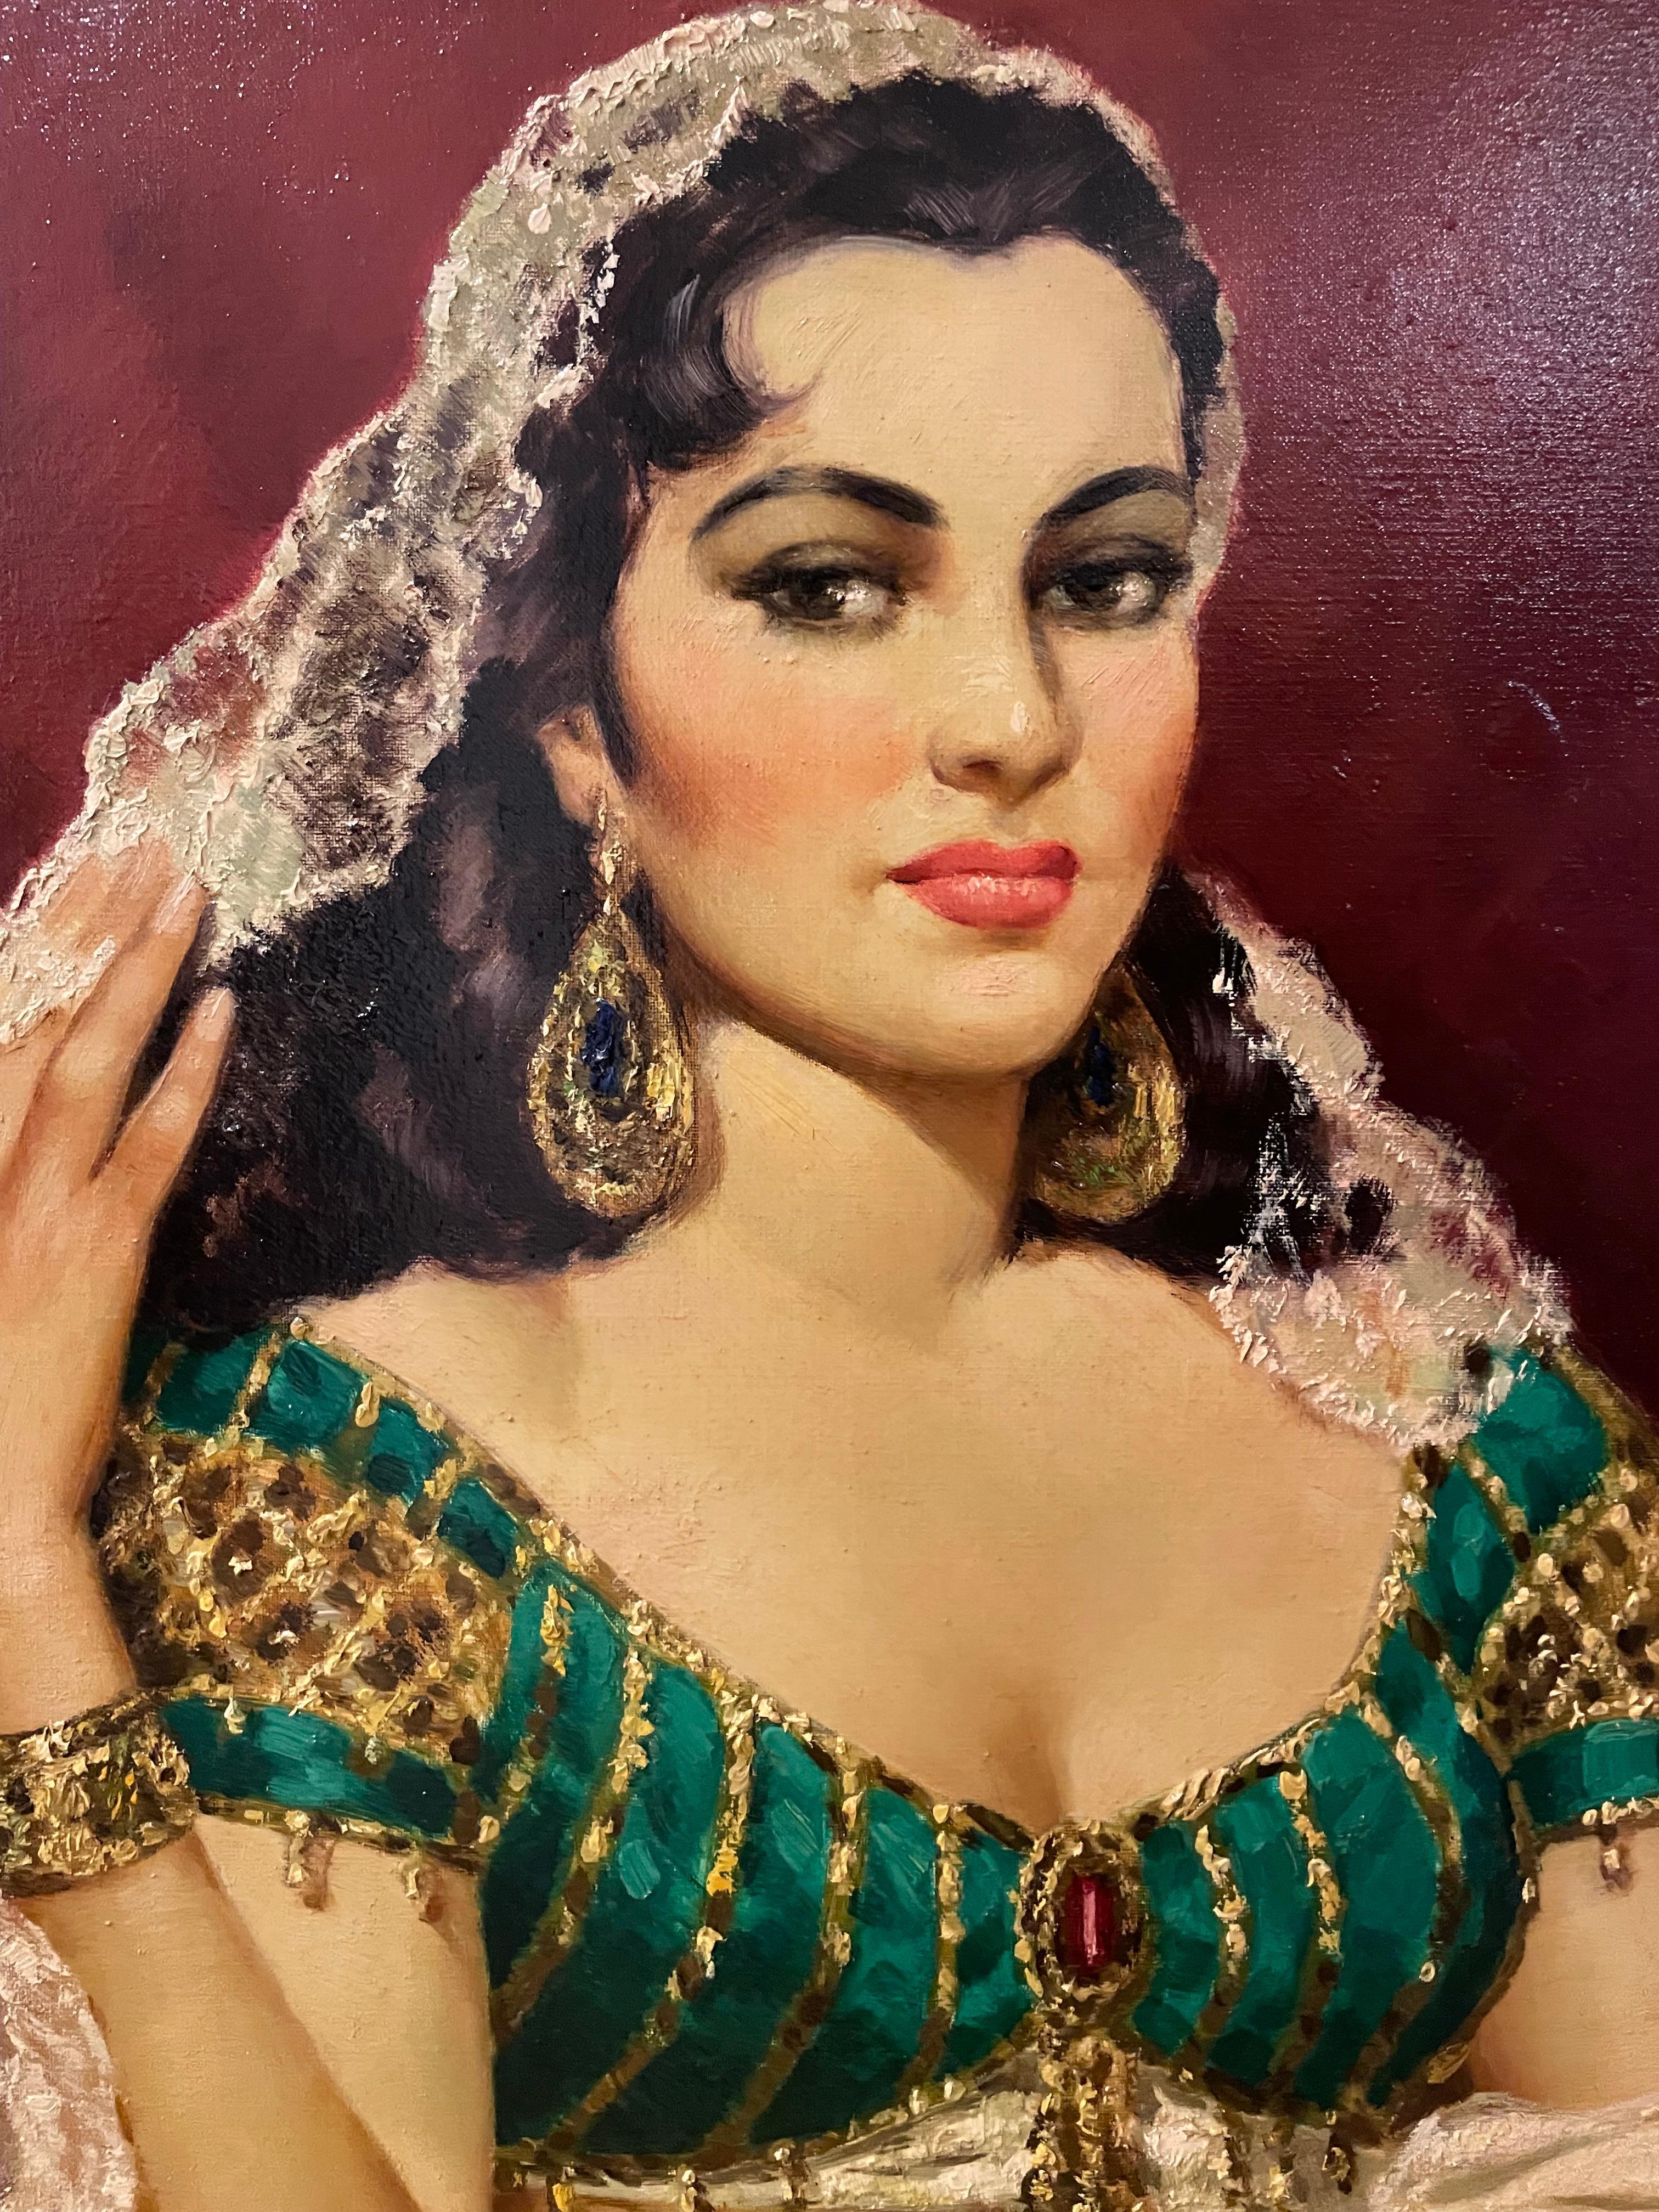 A very large portrait of a young indian woman posing for the artist. While not much is known about the artist or the subject, it appears to have been owned by a resident of London at one point and perhaps painted in Rome as denoted below the